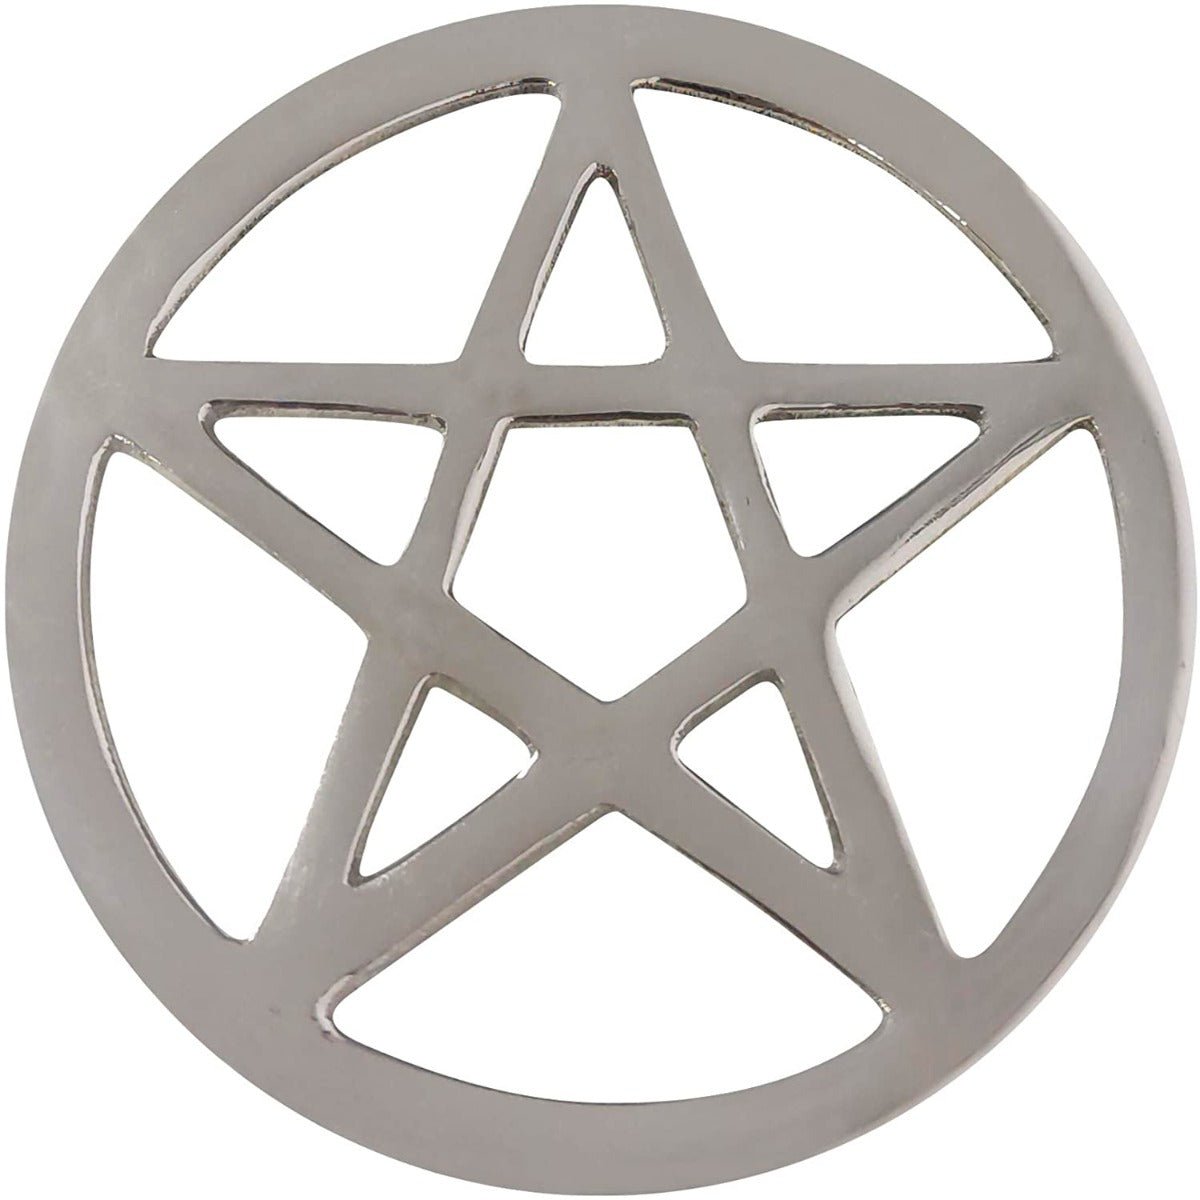 Pentacle Silver Altar Tile, 4 inch - 13 Moons